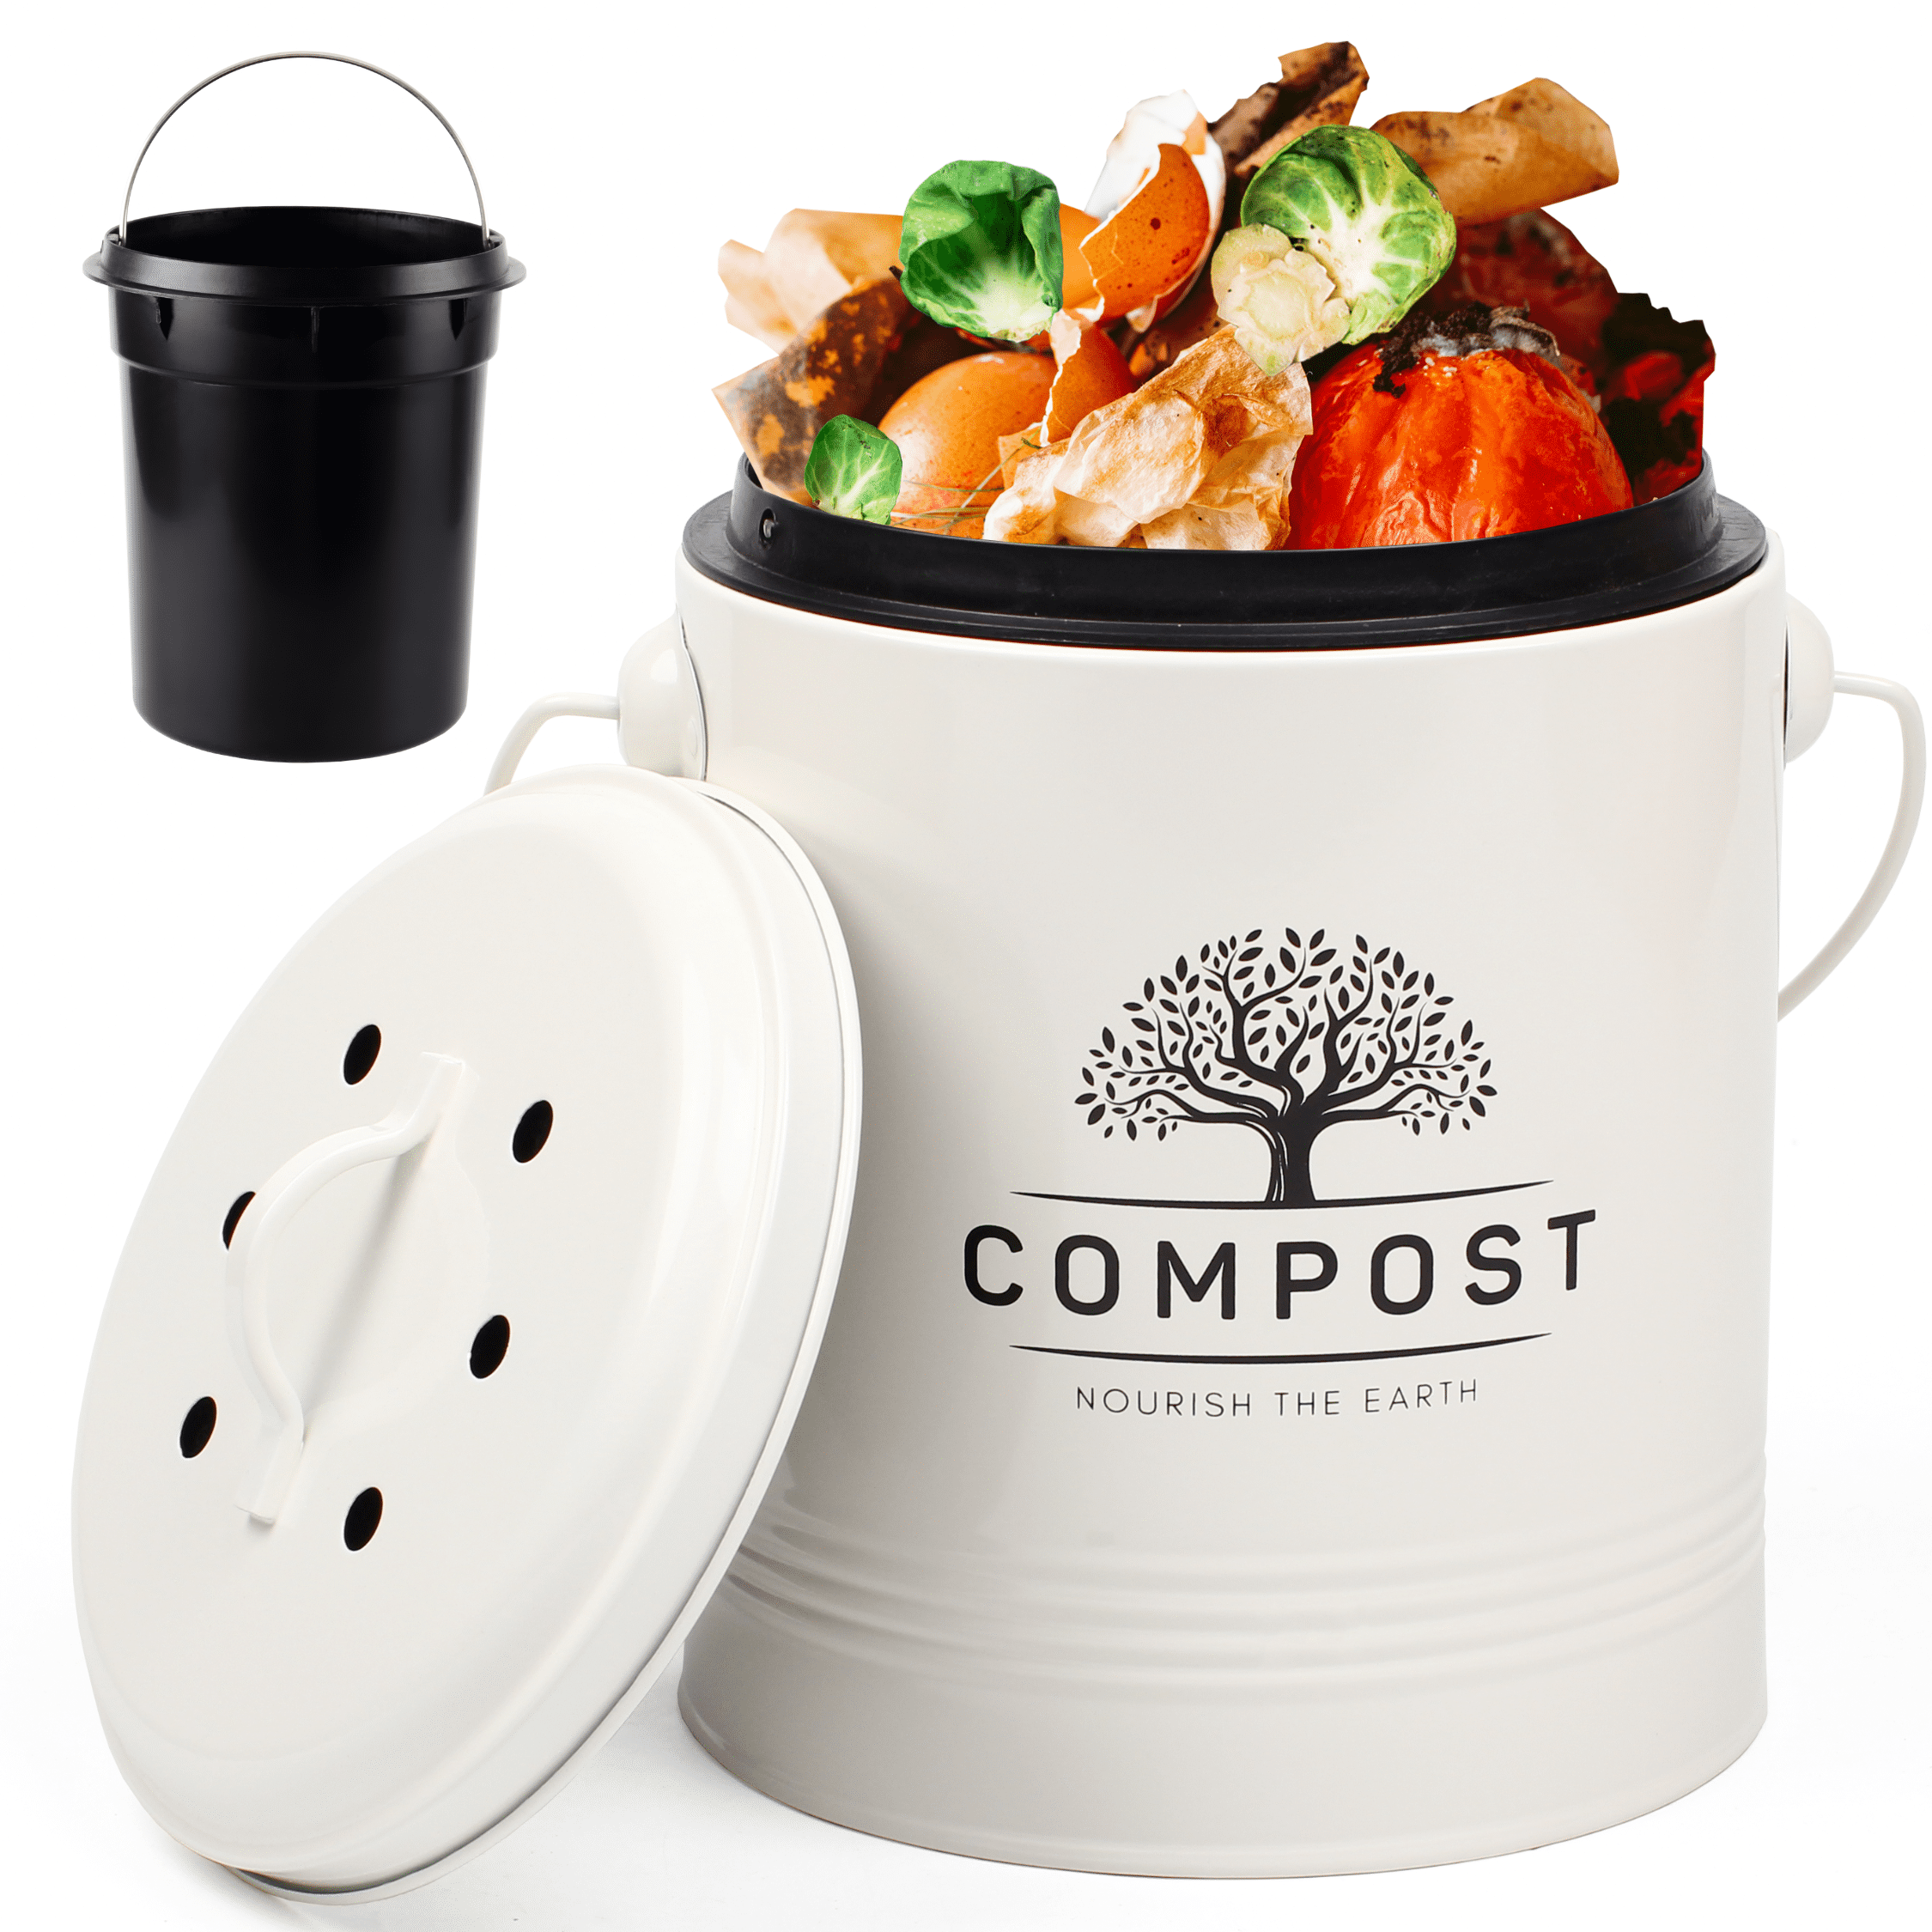 Oversized 1.3 Gallon Kitchen Compost Bin with EZ-No Lock Lid, Plastic Liner  & Charcoal Filters In Black - Sturdy Construction & Odor-Free Seal  Dishwasher Safe Bucket - Countertop Indoor Compost Pail 